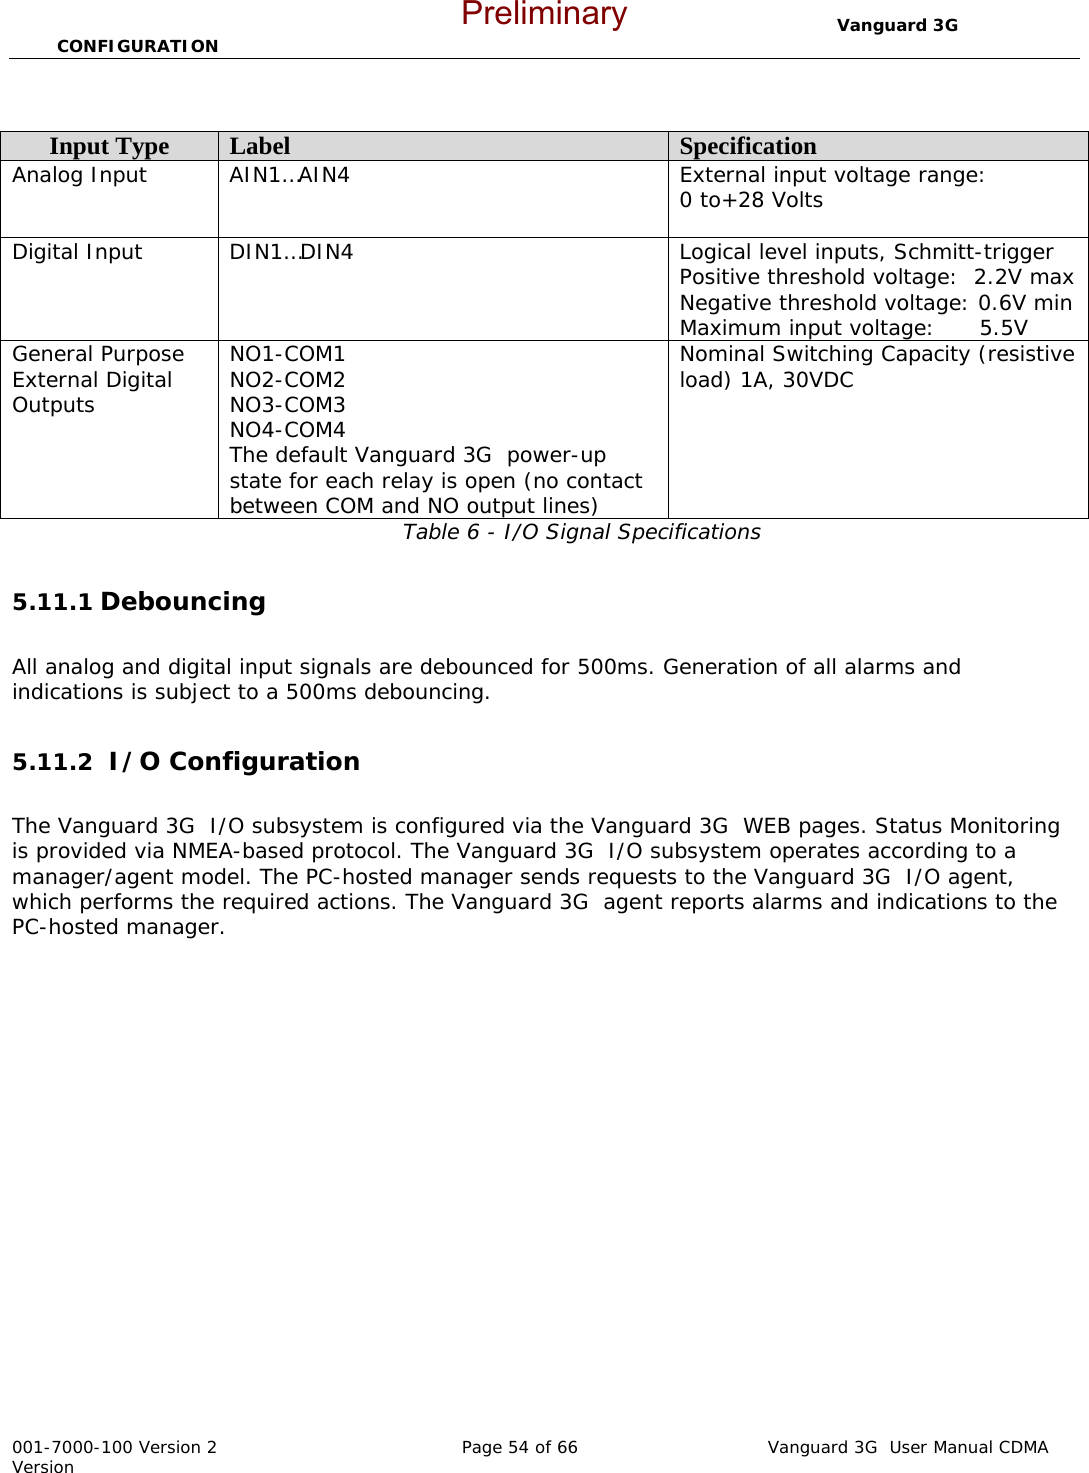                                  Vanguard 3G  CONFIGURATION  001-7000-100 Version 2       Page 54 of 66       Vanguard 3G  User Manual CDMA Version  Table 6 - I/O Signal Specifications  5.11.1 Debouncing     All analog and digital input signals are debounced for 500ms. Generation of all alarms and indications is subject to a 500ms debouncing.  5.11.2  I/O Configuration  The Vanguard 3G  I/O subsystem is configured via the Vanguard 3G  WEB pages. Status Monitoring is provided via NMEA-based protocol. The Vanguard 3G  I/O subsystem operates according to a manager/agent model. The PC-hosted manager sends requests to the Vanguard 3G  I/O agent, which performs the required actions. The Vanguard 3G  agent reports alarms and indications to the PC-hosted manager. Input Type  Label  Specification Analog Input  AIN1…AIN4  External input voltage range: 0 to+28 Volts  Digital Input  DIN1…DIN4  Logical level inputs, Schmitt-trigger Positive threshold voltage:  2.2V max Negative threshold voltage: 0.6V min Maximum input voltage:      5.5V General Purpose External Digital Outputs NO1-COM1 NO2-COM2 NO3-COM3 NO4-COM4 The default Vanguard 3G  power-up state for each relay is open (no contact between COM and NO output lines) Nominal Switching Capacity (resistive load) 1A, 30VDC  Preliminary